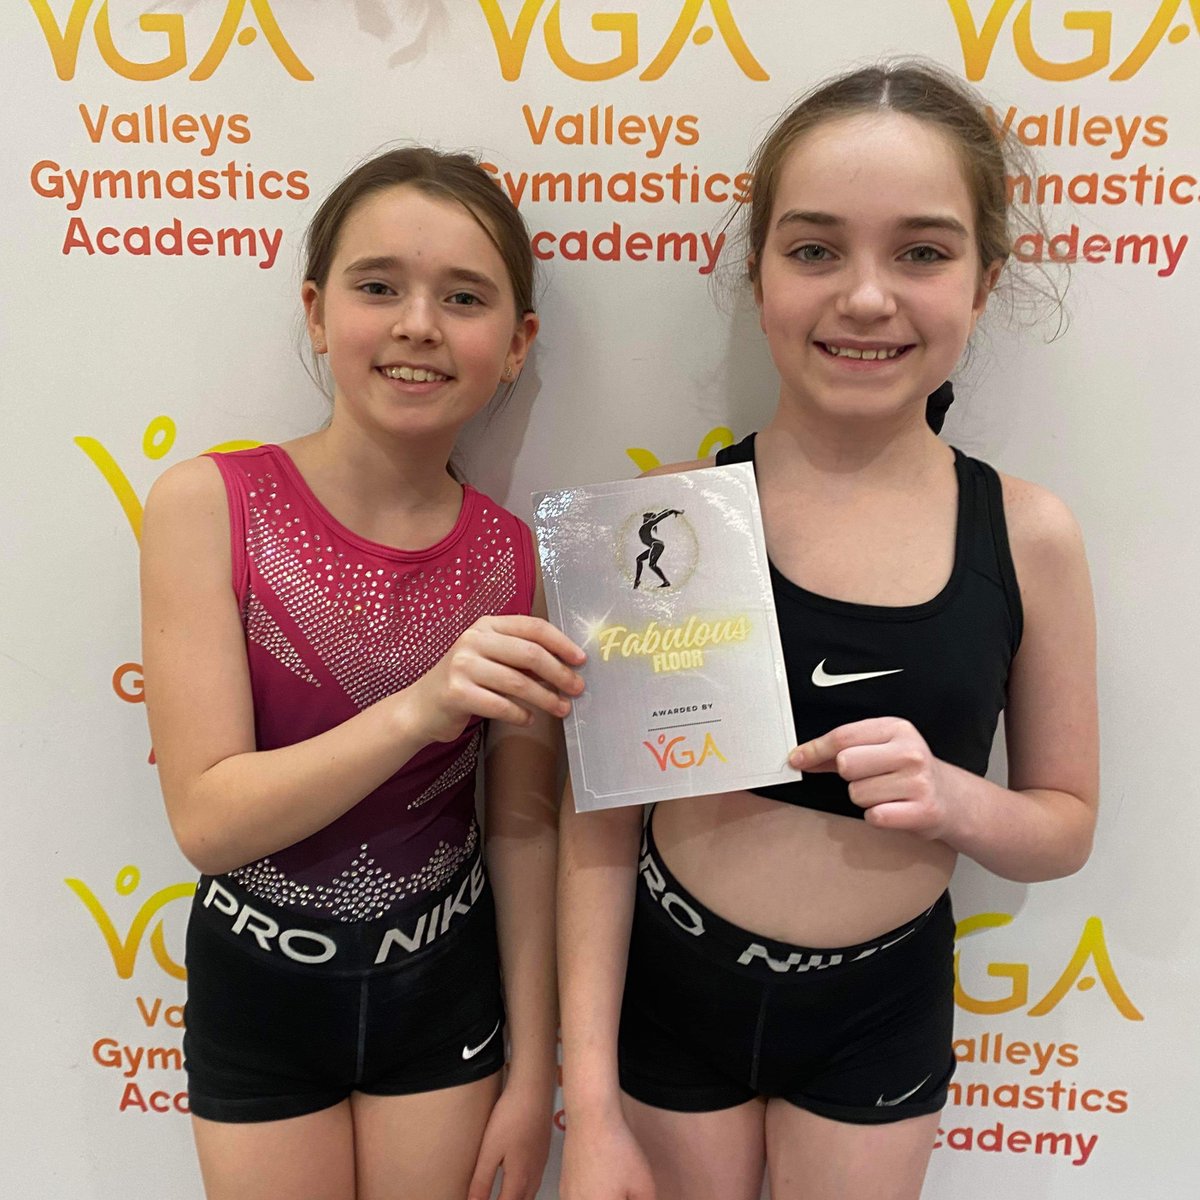 Look at those smiles!! Our Disability Squad members have been working extremely hard for their forthcoming competitions! #TeamVGA